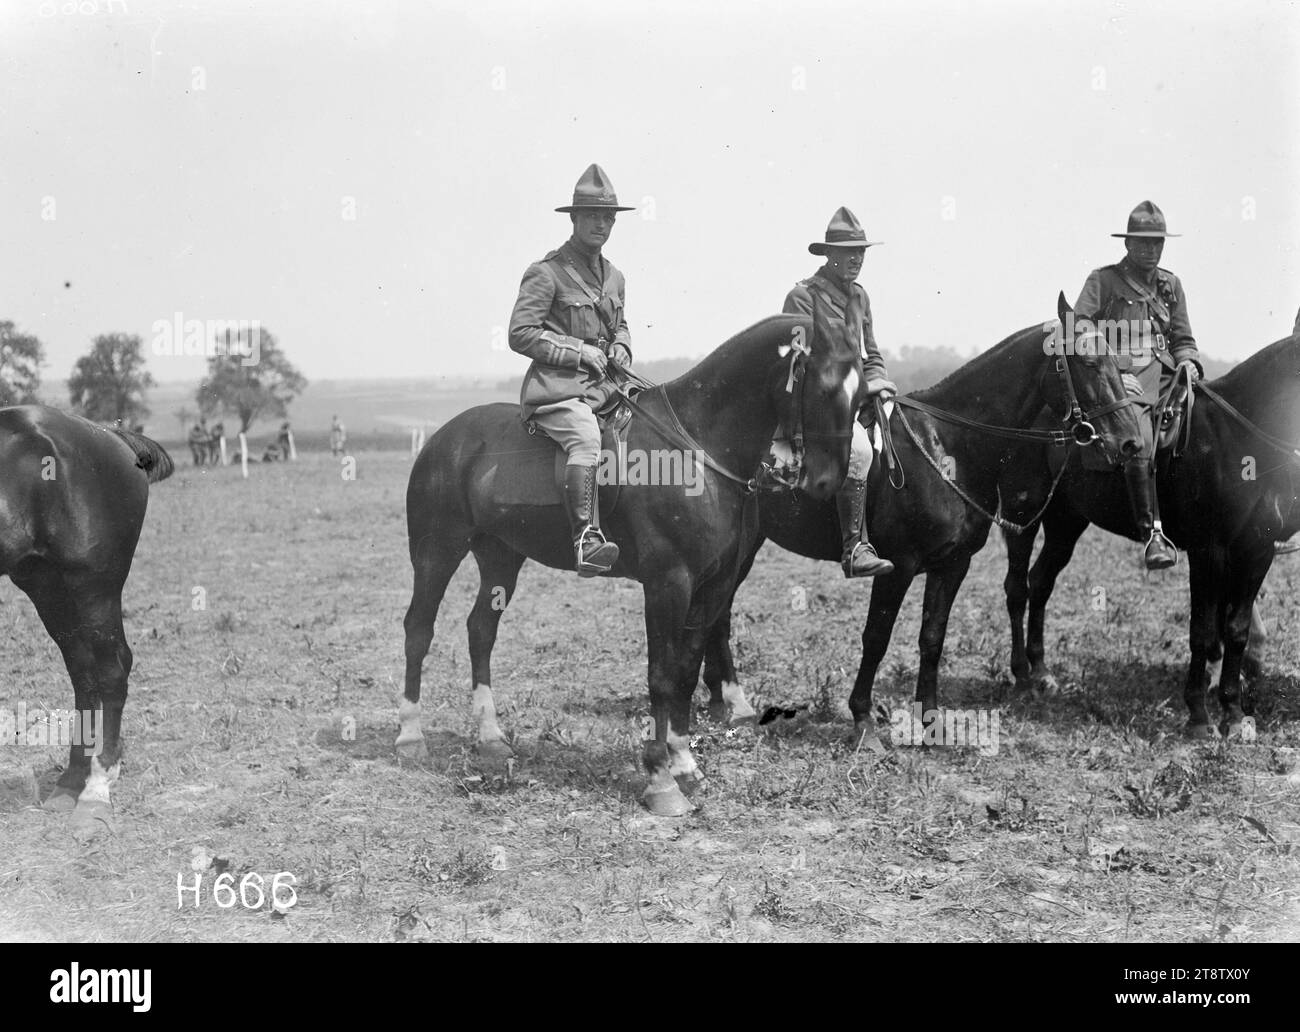 Winner of the Officers' Charger Class, New Zealand Divisional horse show, Courcelles, The winning team of the Officers' Charger Class at the New Zealand Divisional horse show in Courcelles, France, during World War I. Rider and horse are shown with other entrants. Photograph taken 3 June 1918 Stock Photo